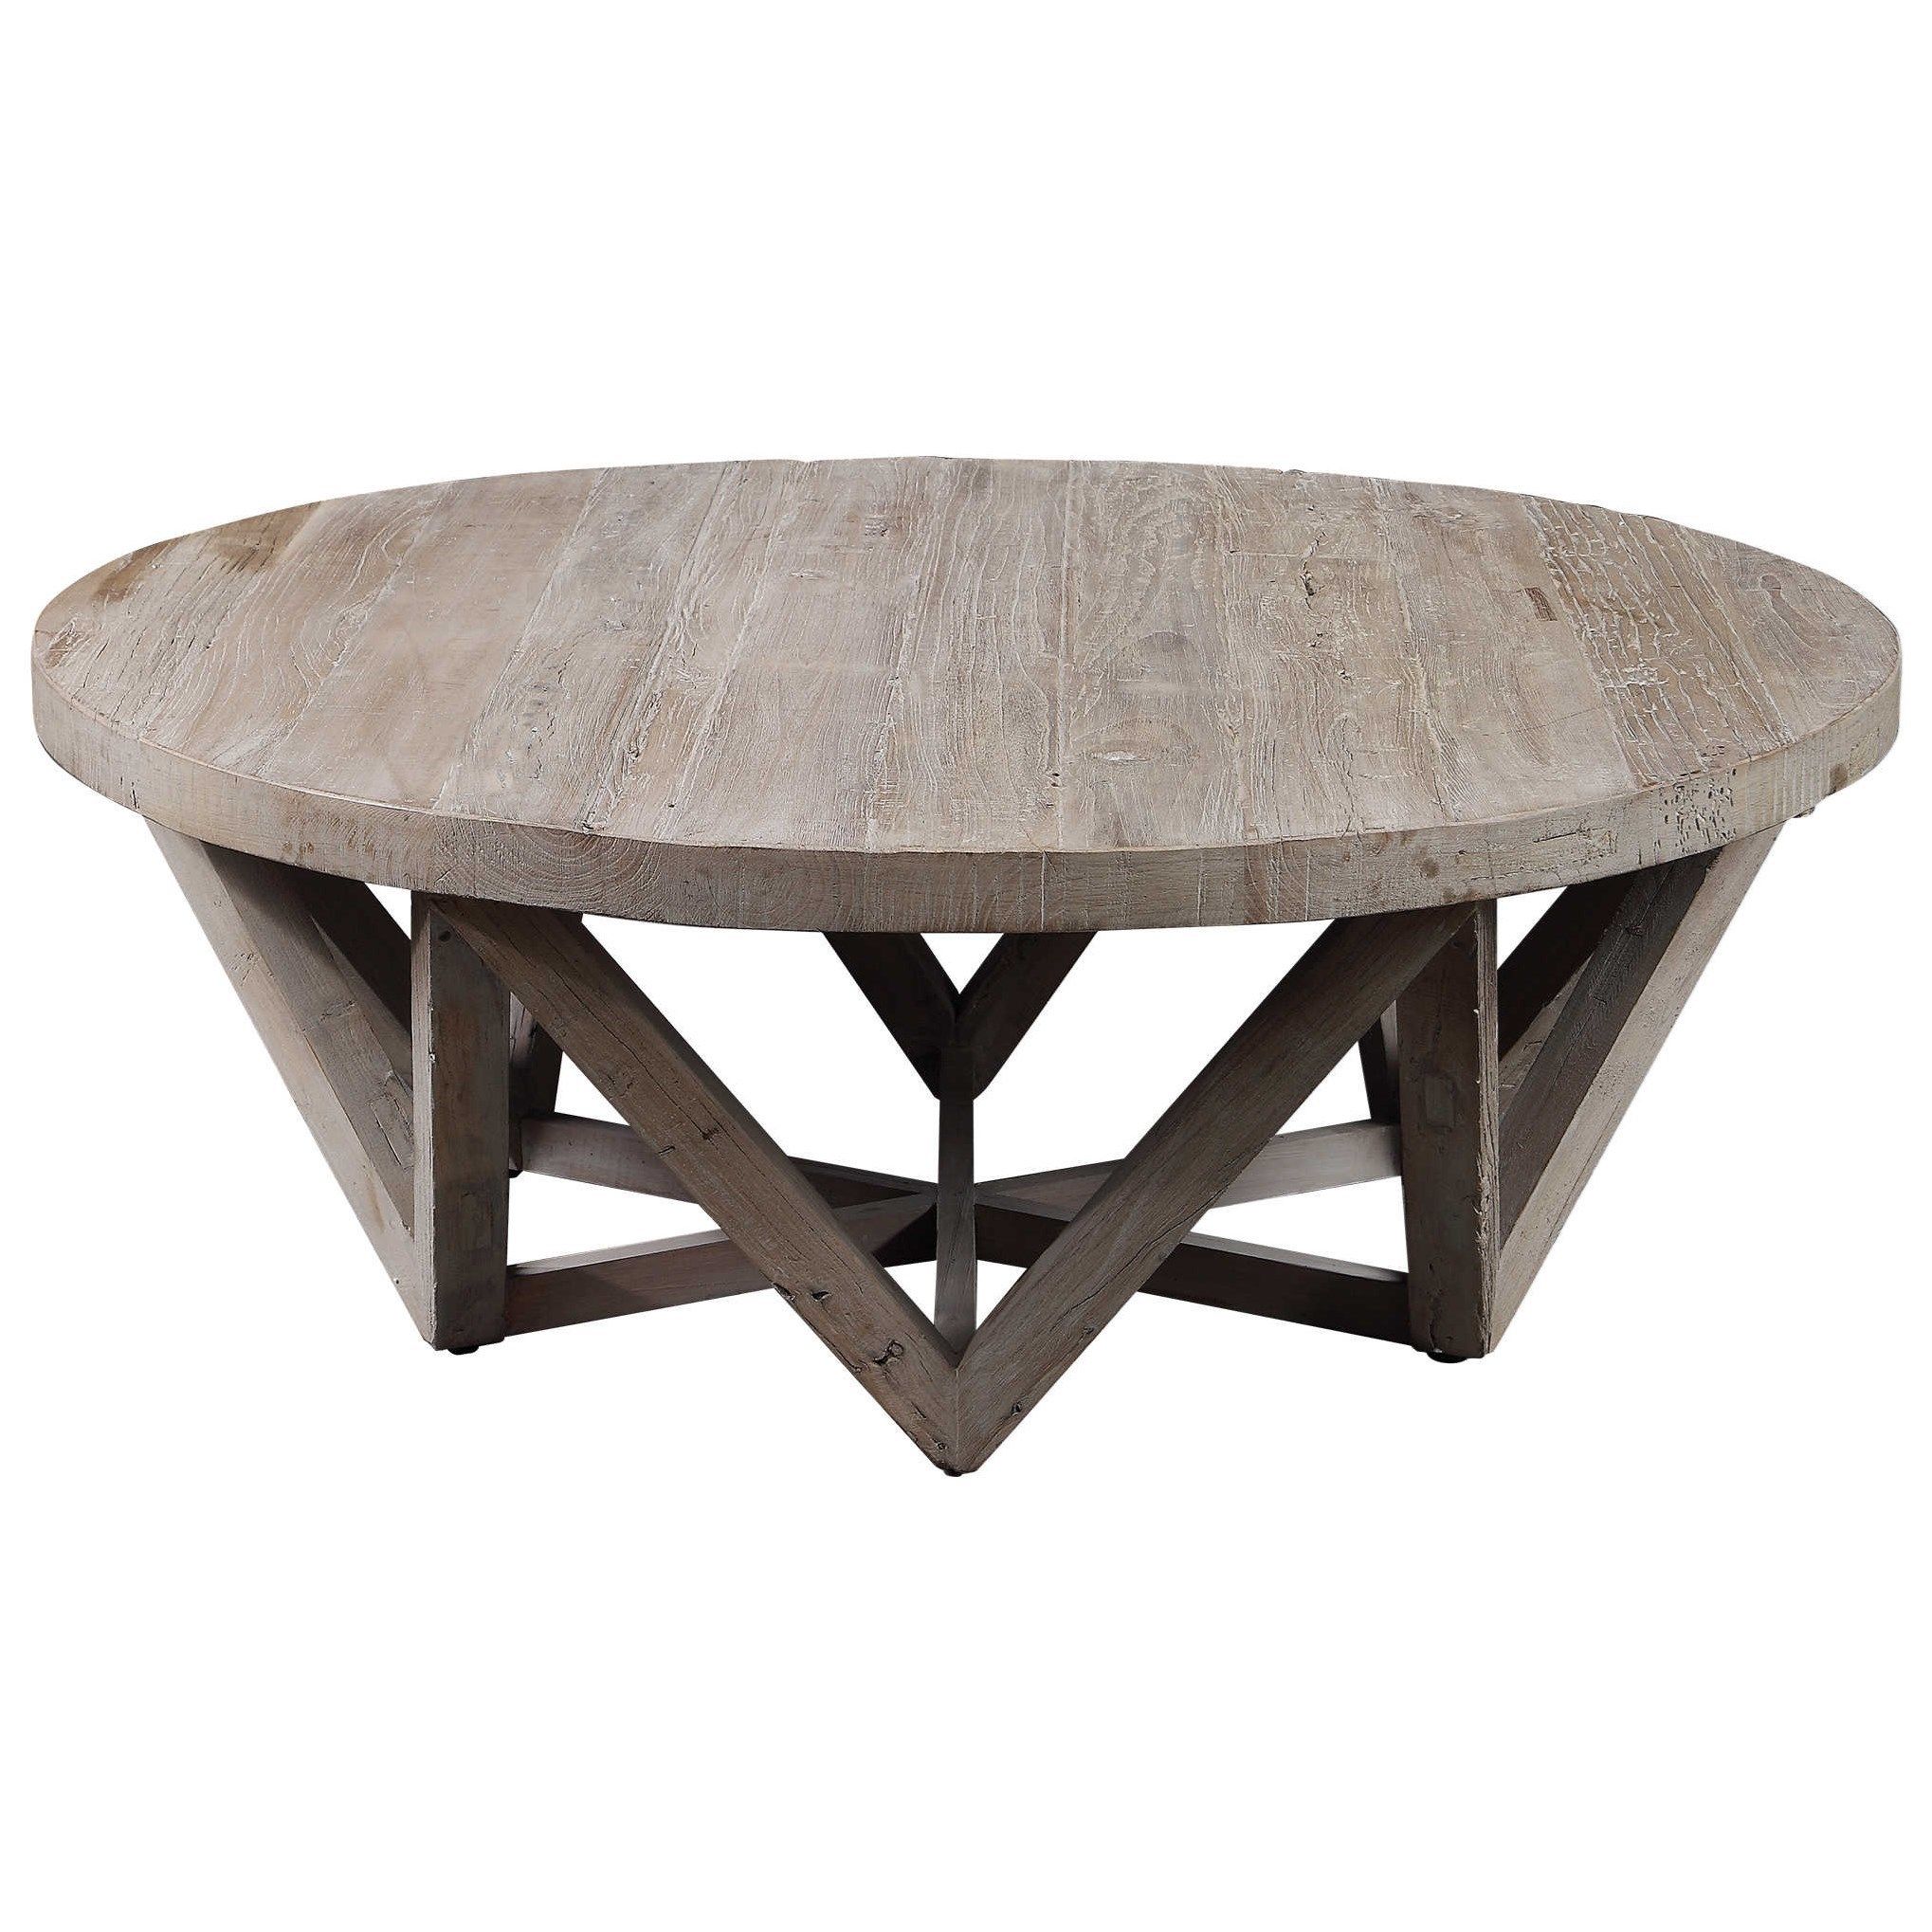 Uttermost Accent Furniture – Occasional Tables Kendry Reclaimed Wood Throughout Occasional Coffee Tables (Gallery 10 of 20)